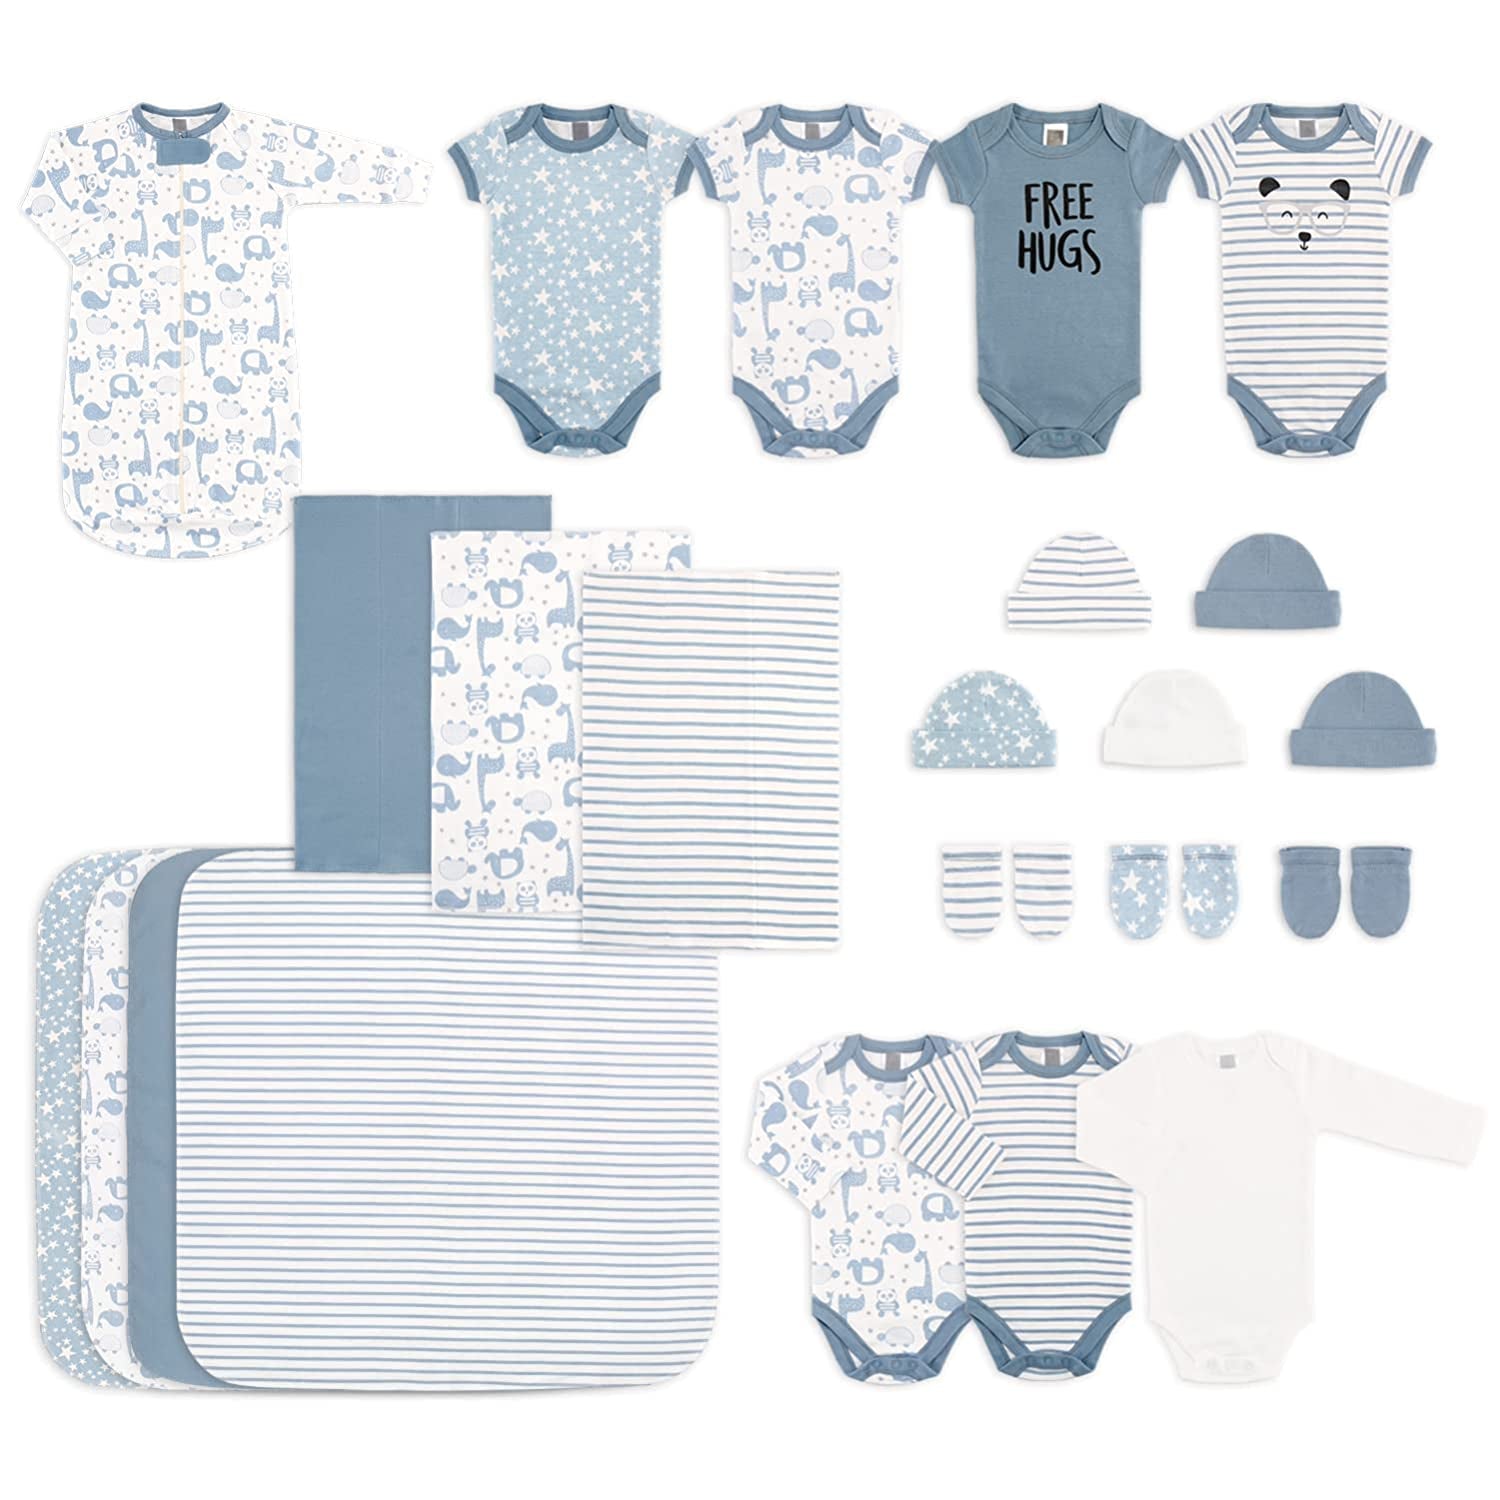 23 Piece Newborn Clothes Set for Baby Boys | Layette Gift Set